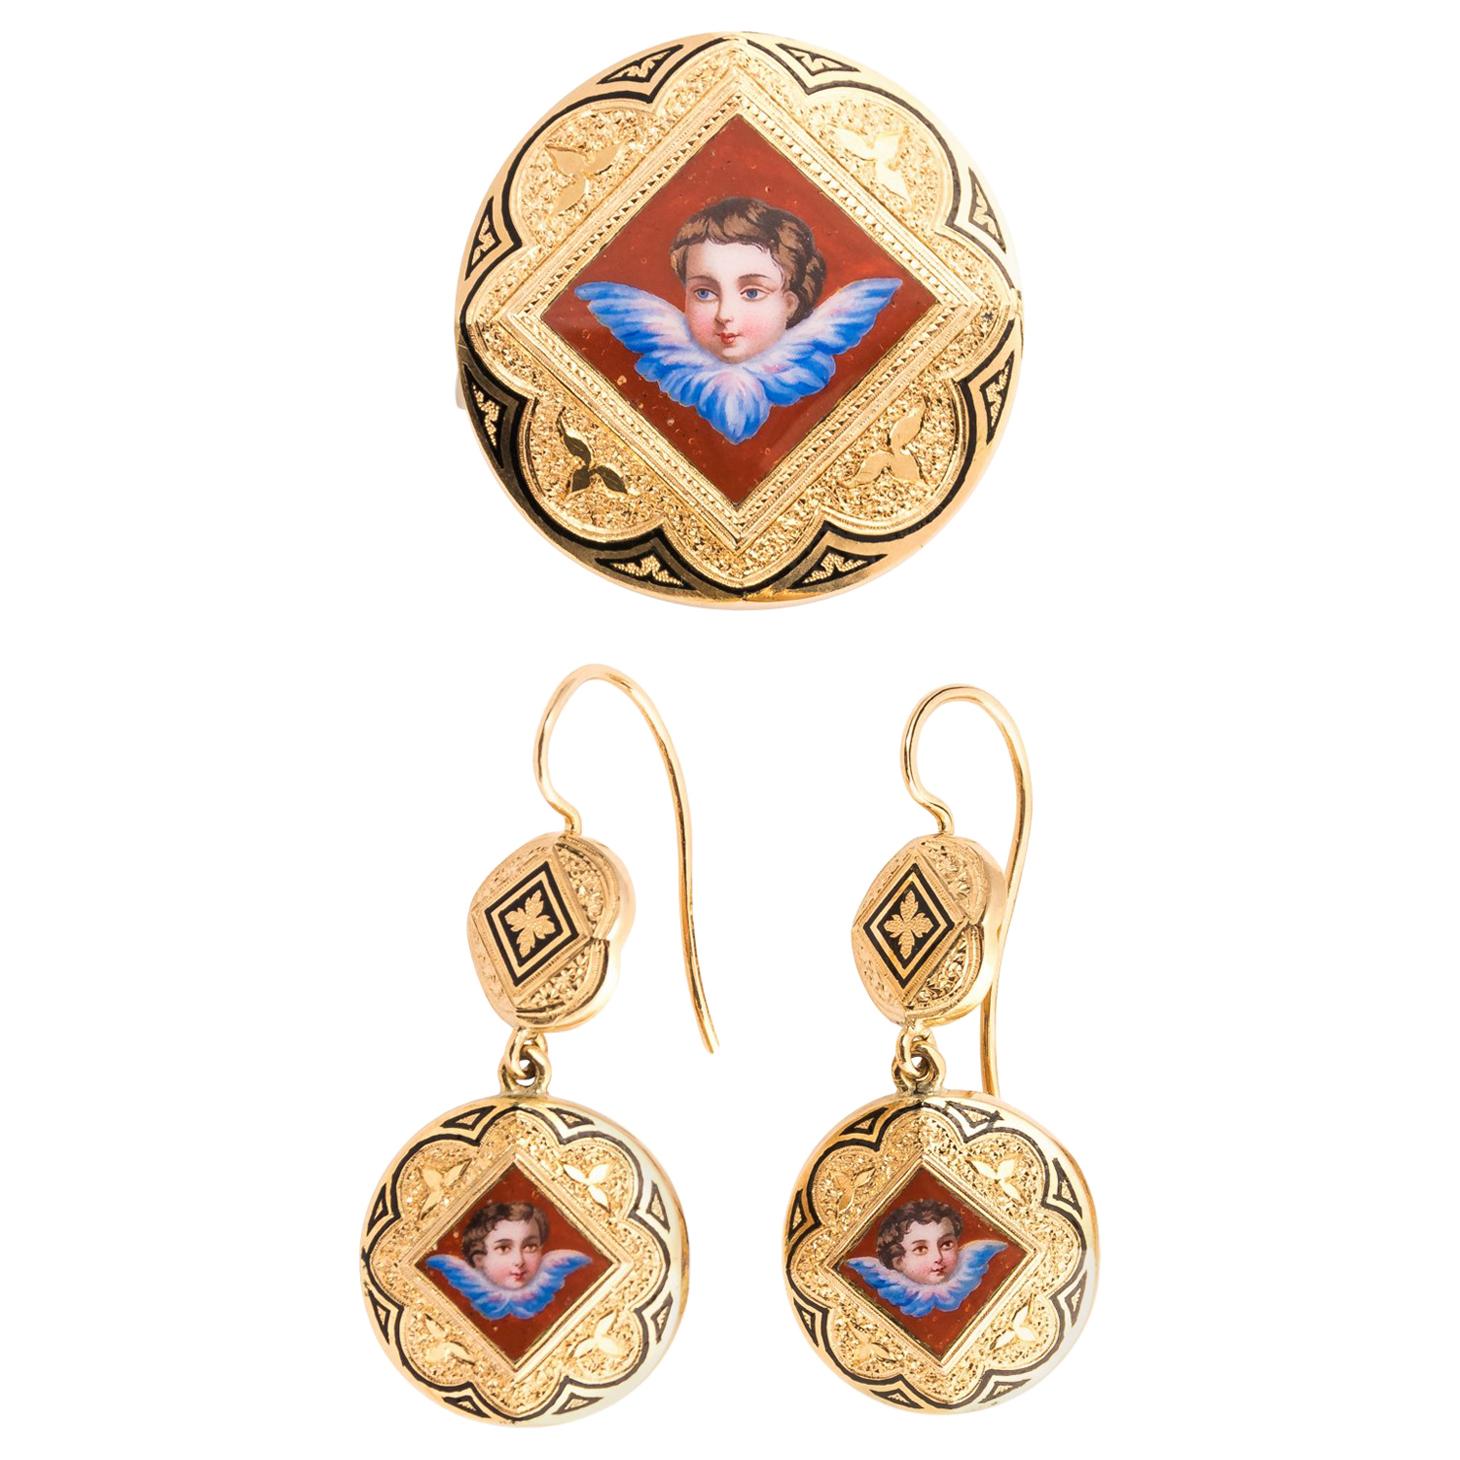 Set of 18K Gold and Enamel Antique Brooch and Earrings For Sale